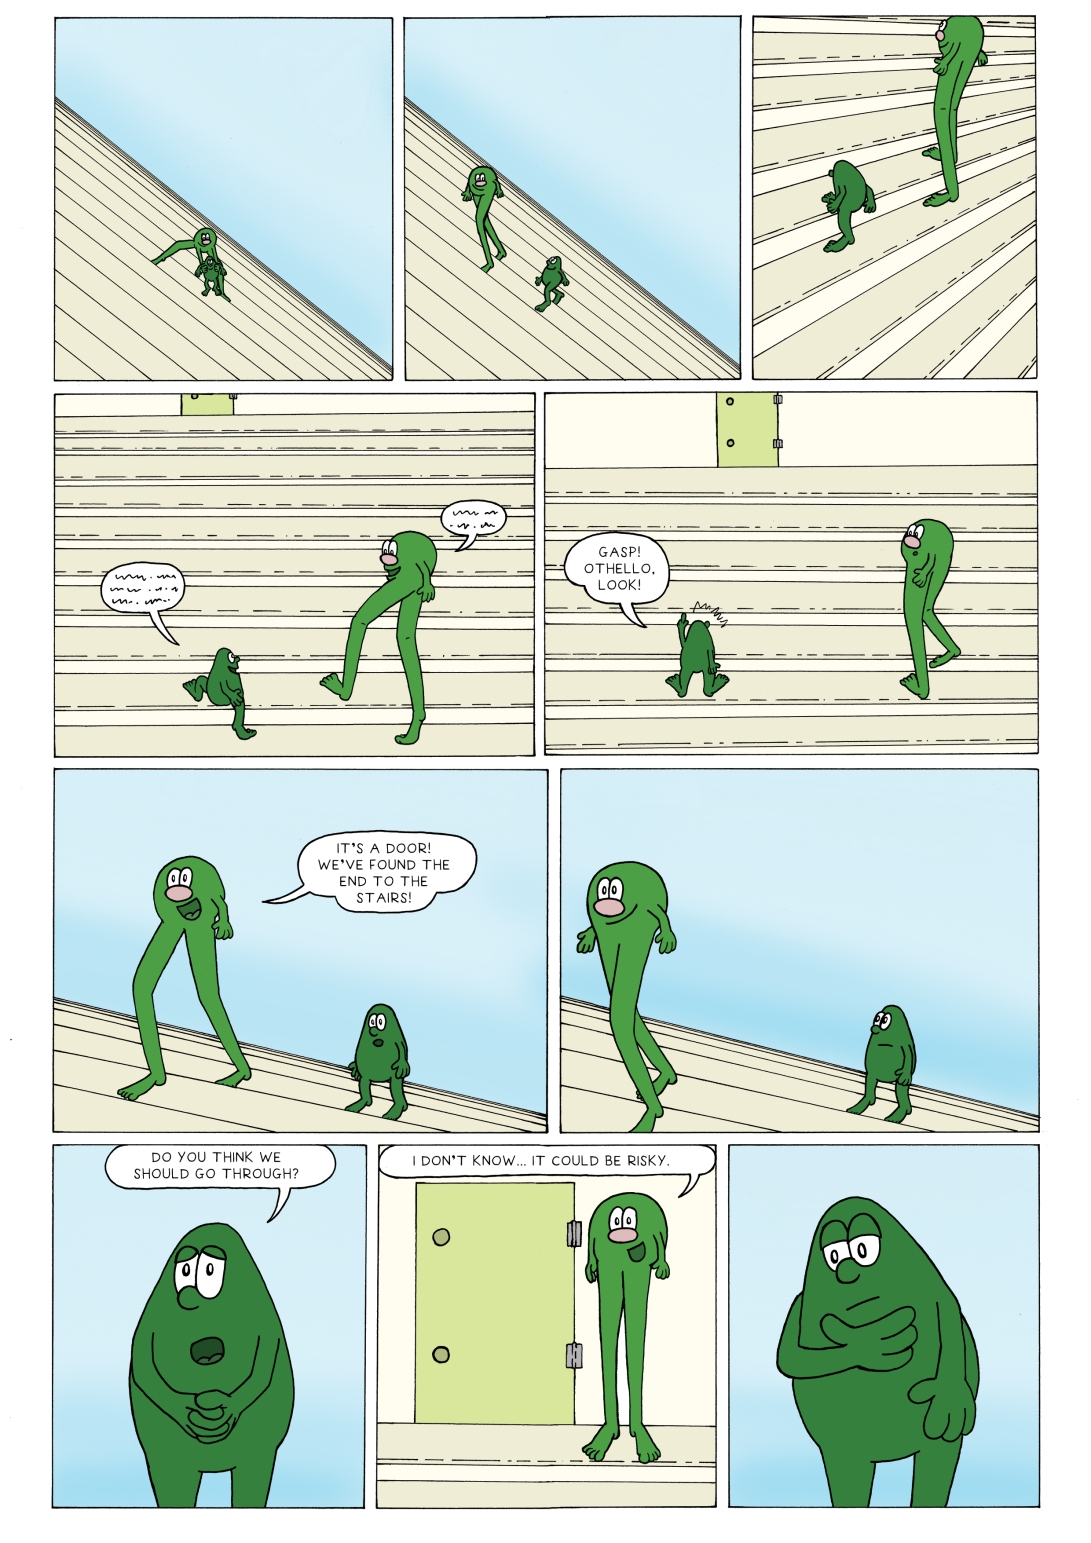 Stairs page 4b